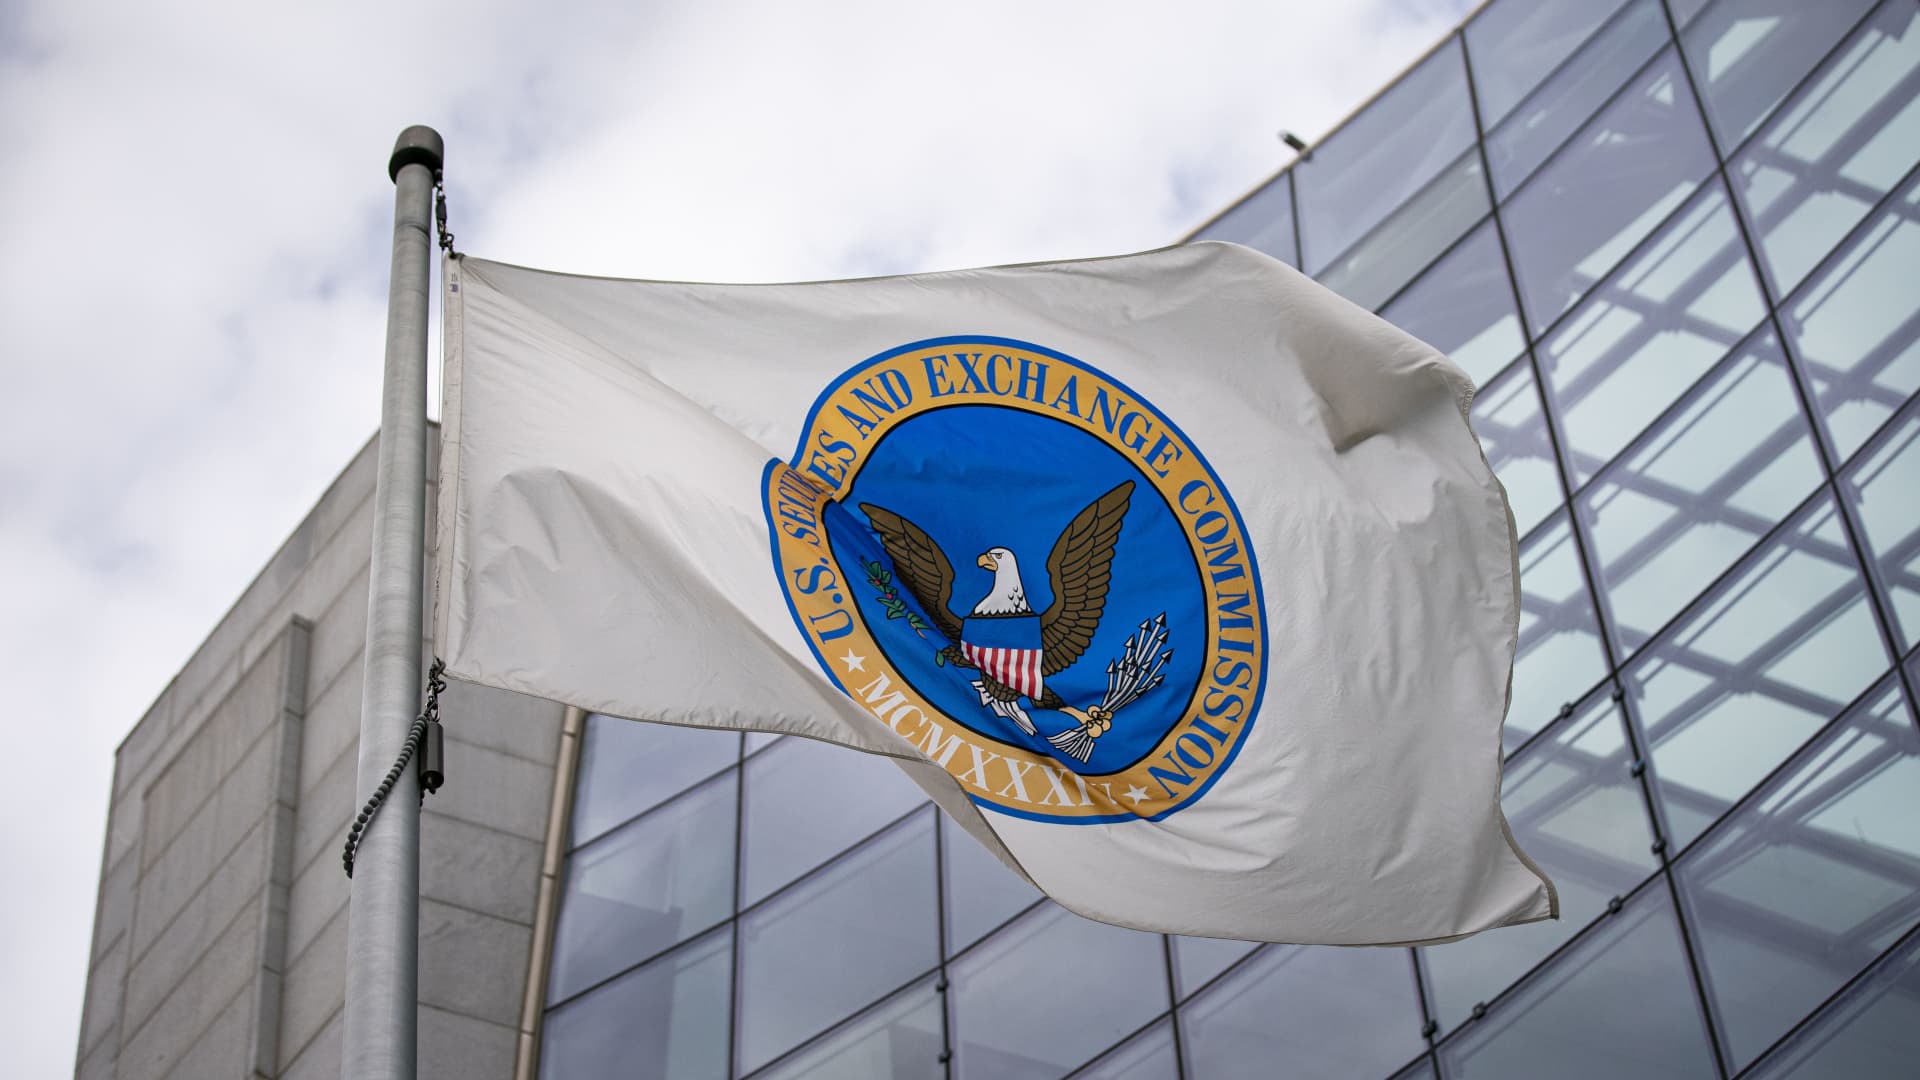 SEC pushes ahead with slate of proposals to boost corporate reporting, disclosure requirements